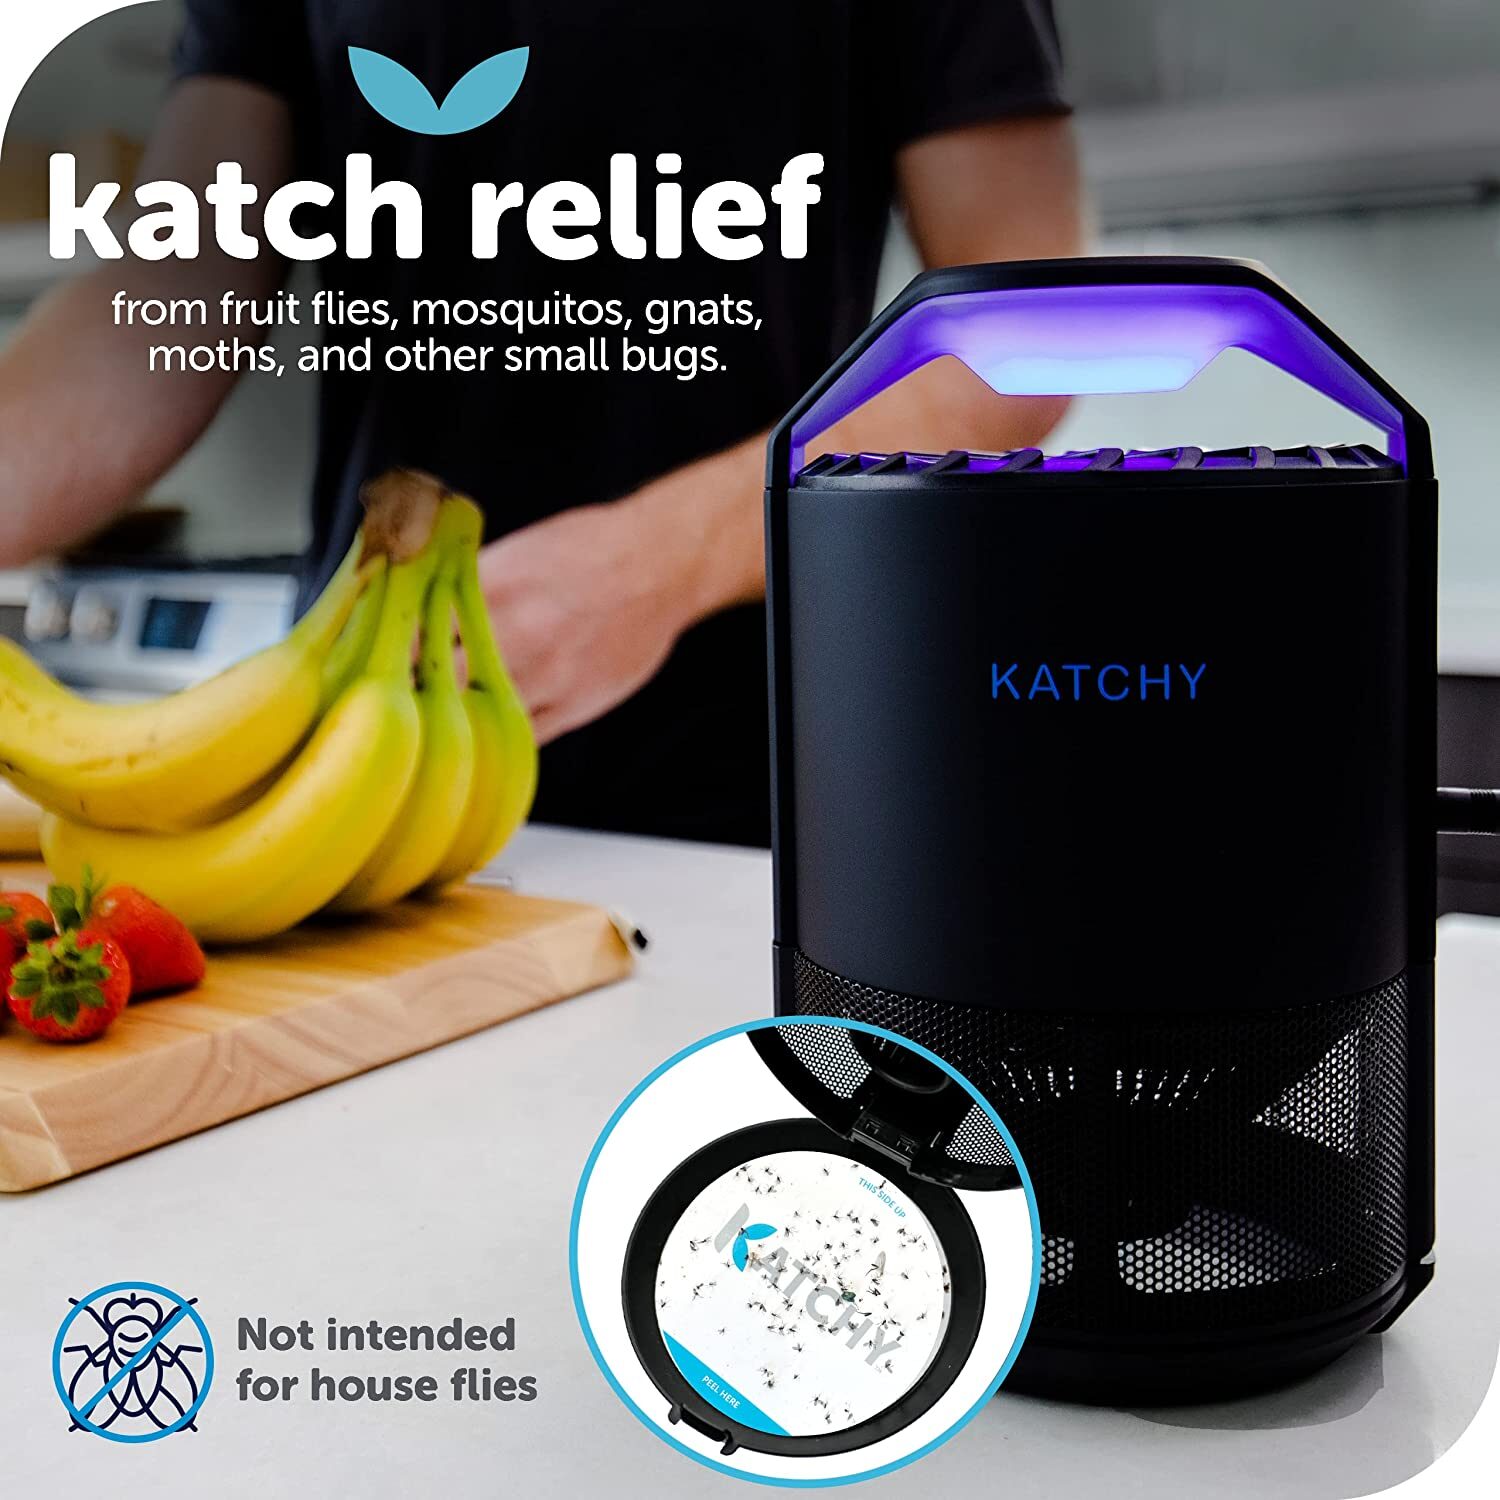 https://cyberguy.com/wp-content/uploads/2020/07/Katchy-Indoor-Insect-Trap-Catcher-Killer-for-Mosquito-Gnat-Moth-Fruit-Flies-1500x1500.jpg